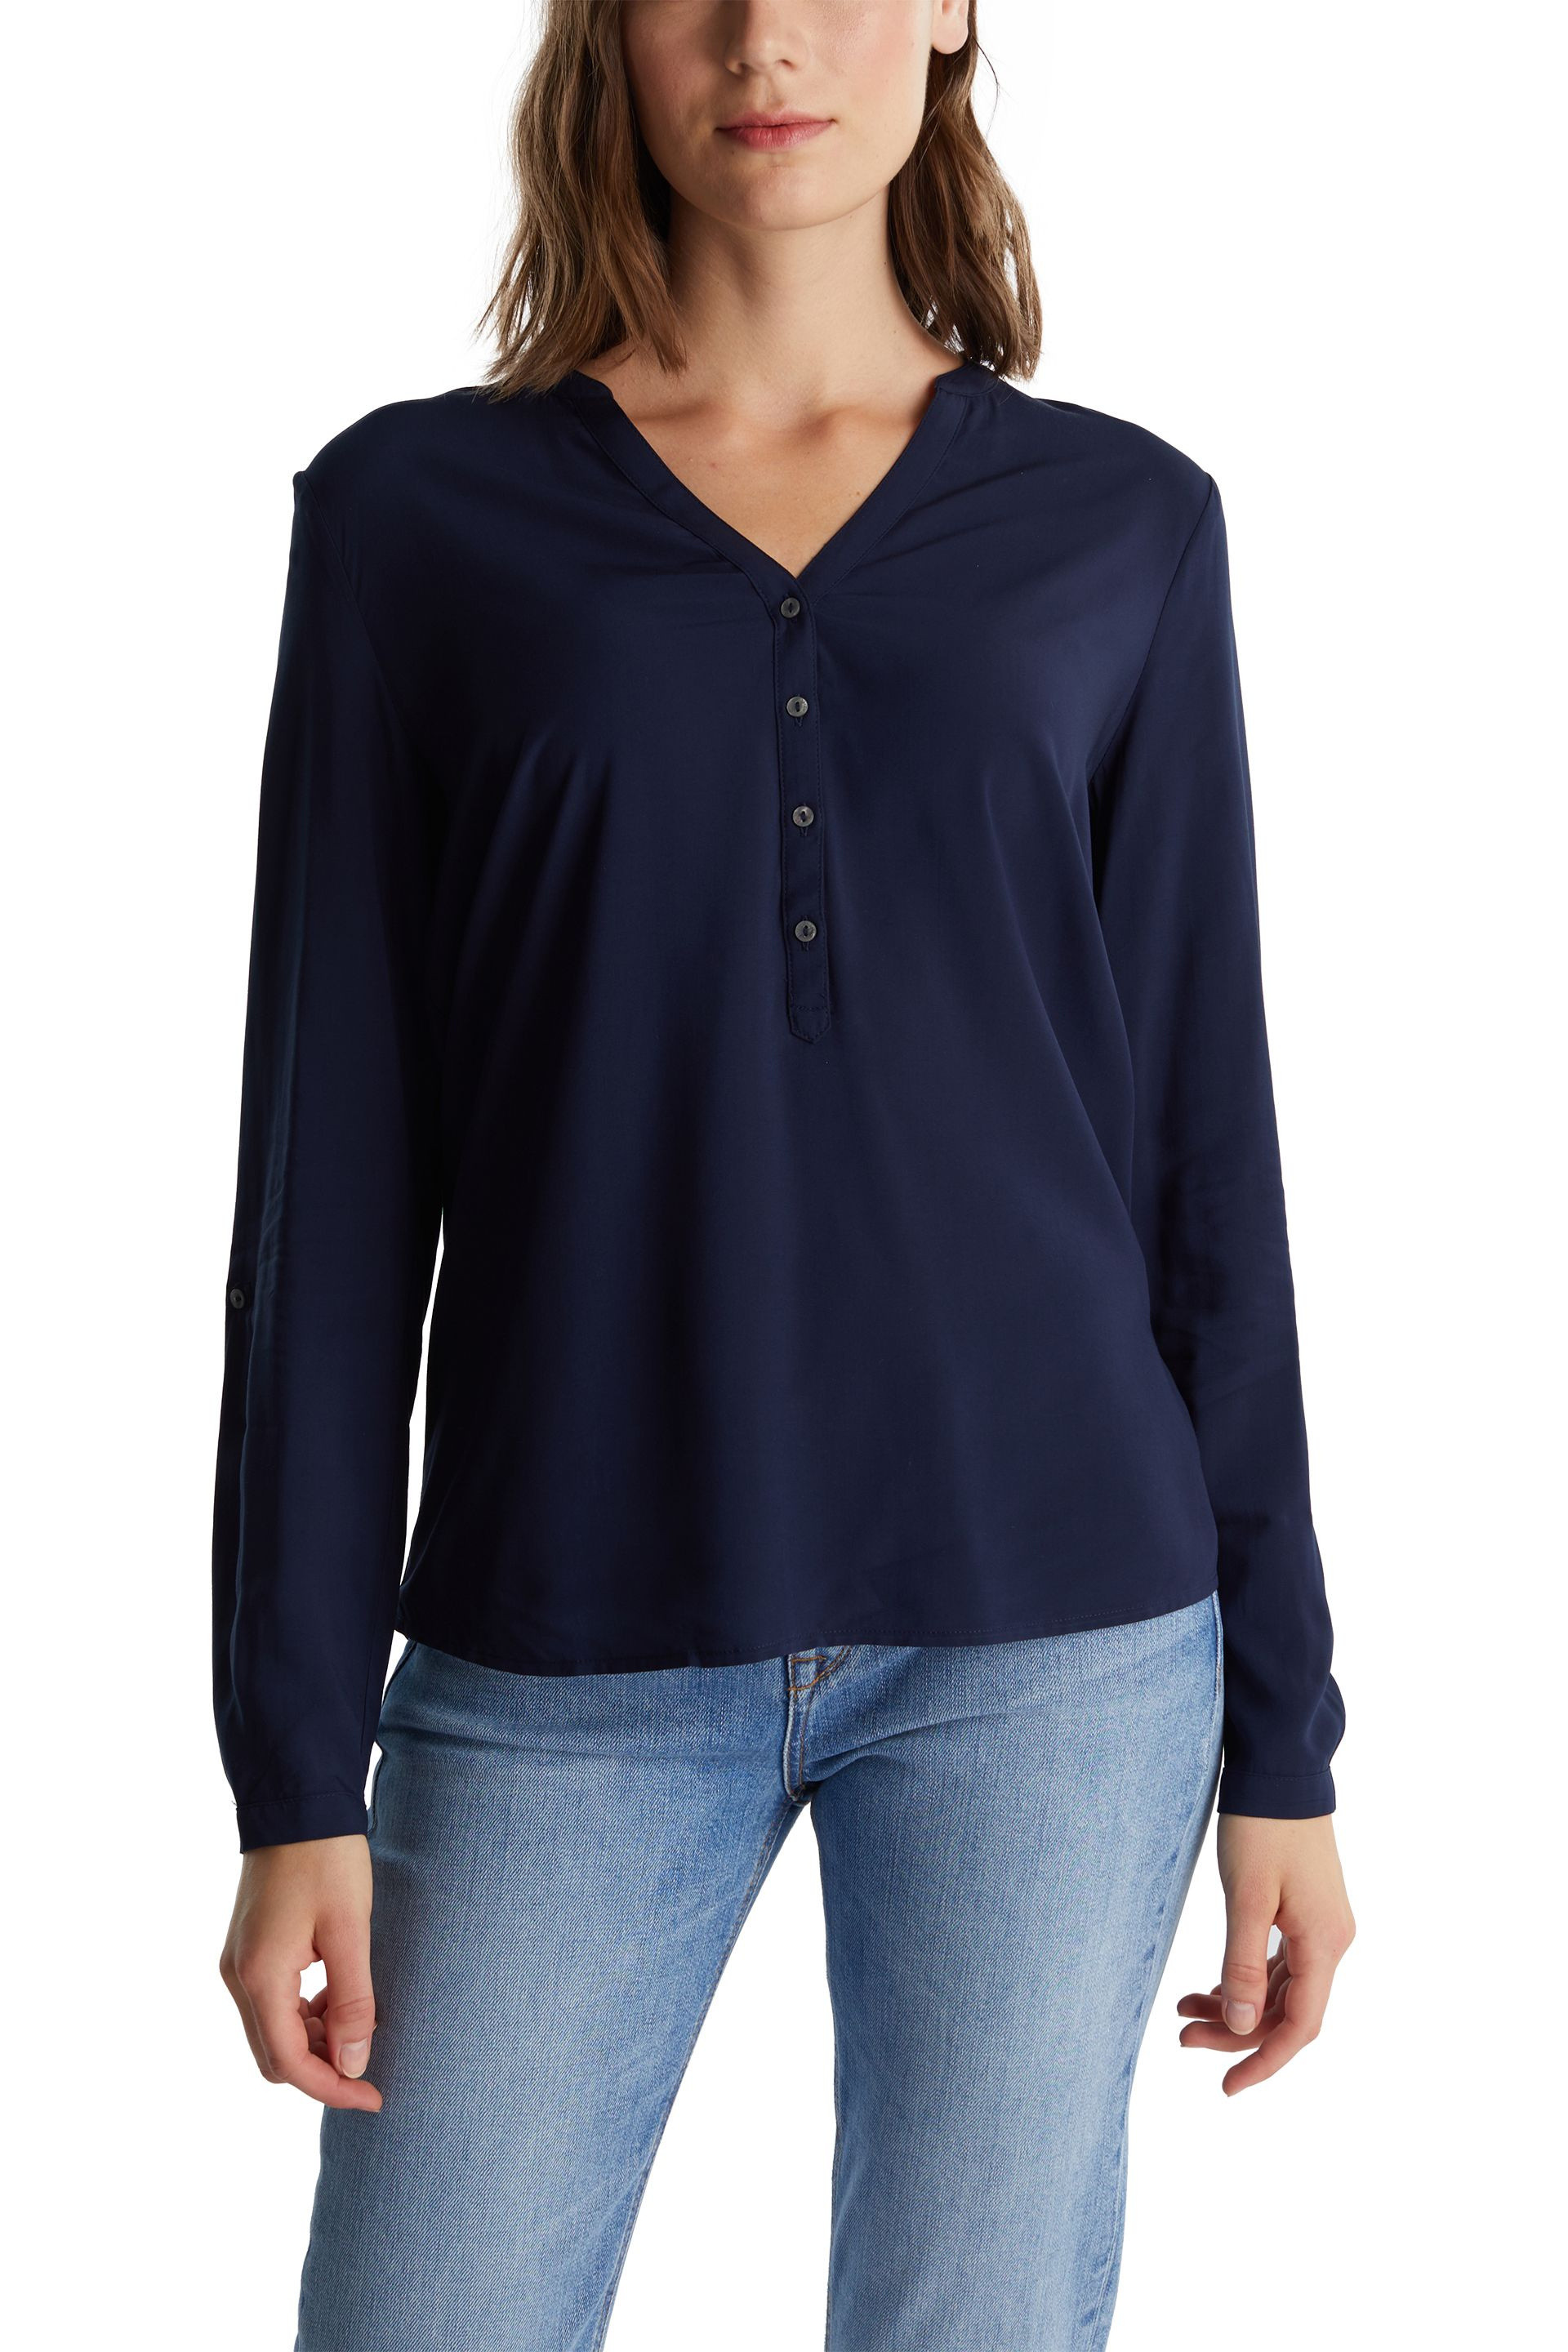 Blouse with adjustable sleeves, Blue, large image number 1